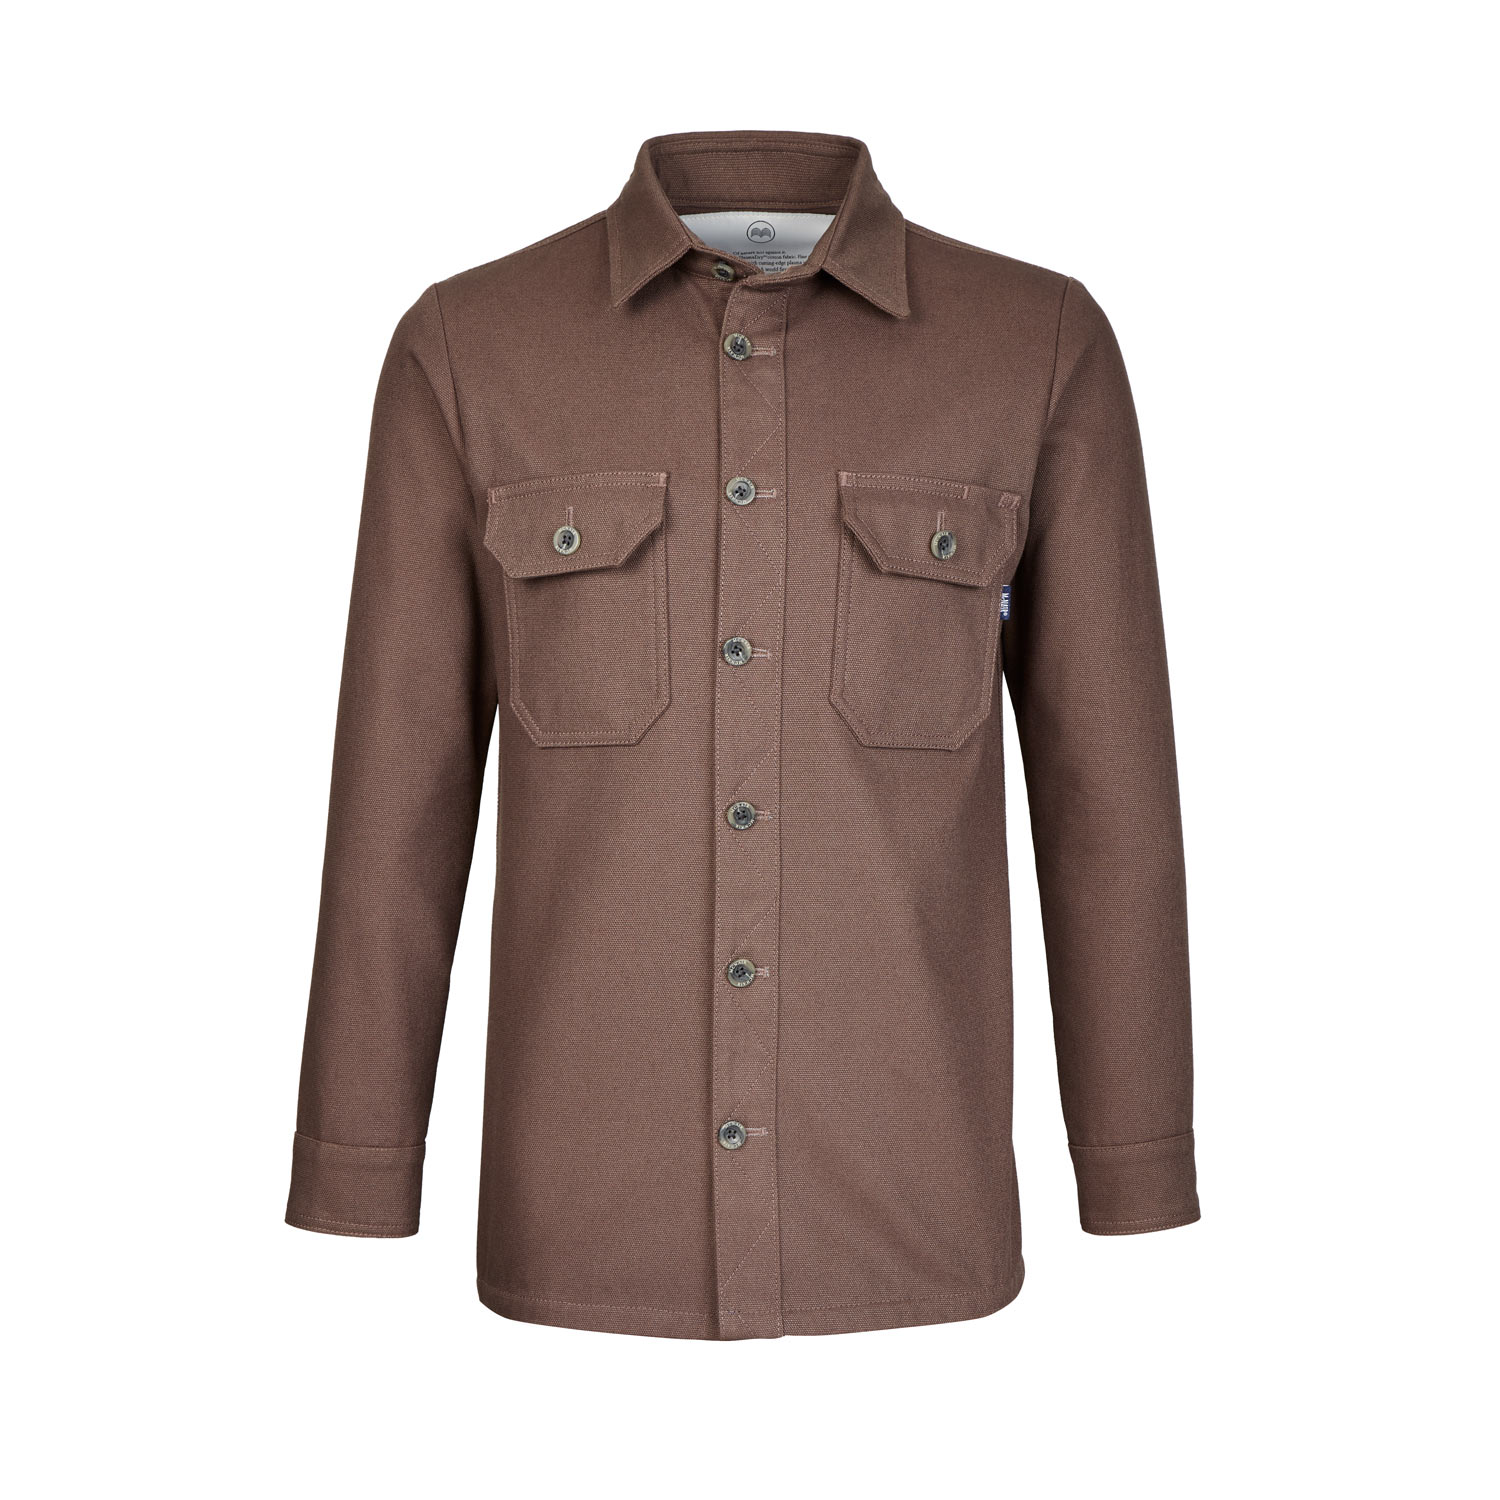 This new shirt has all the rugged looks of our classic Mountain Shirt but  is designed as a true Work Shirt to be worn equally inside as well as ...